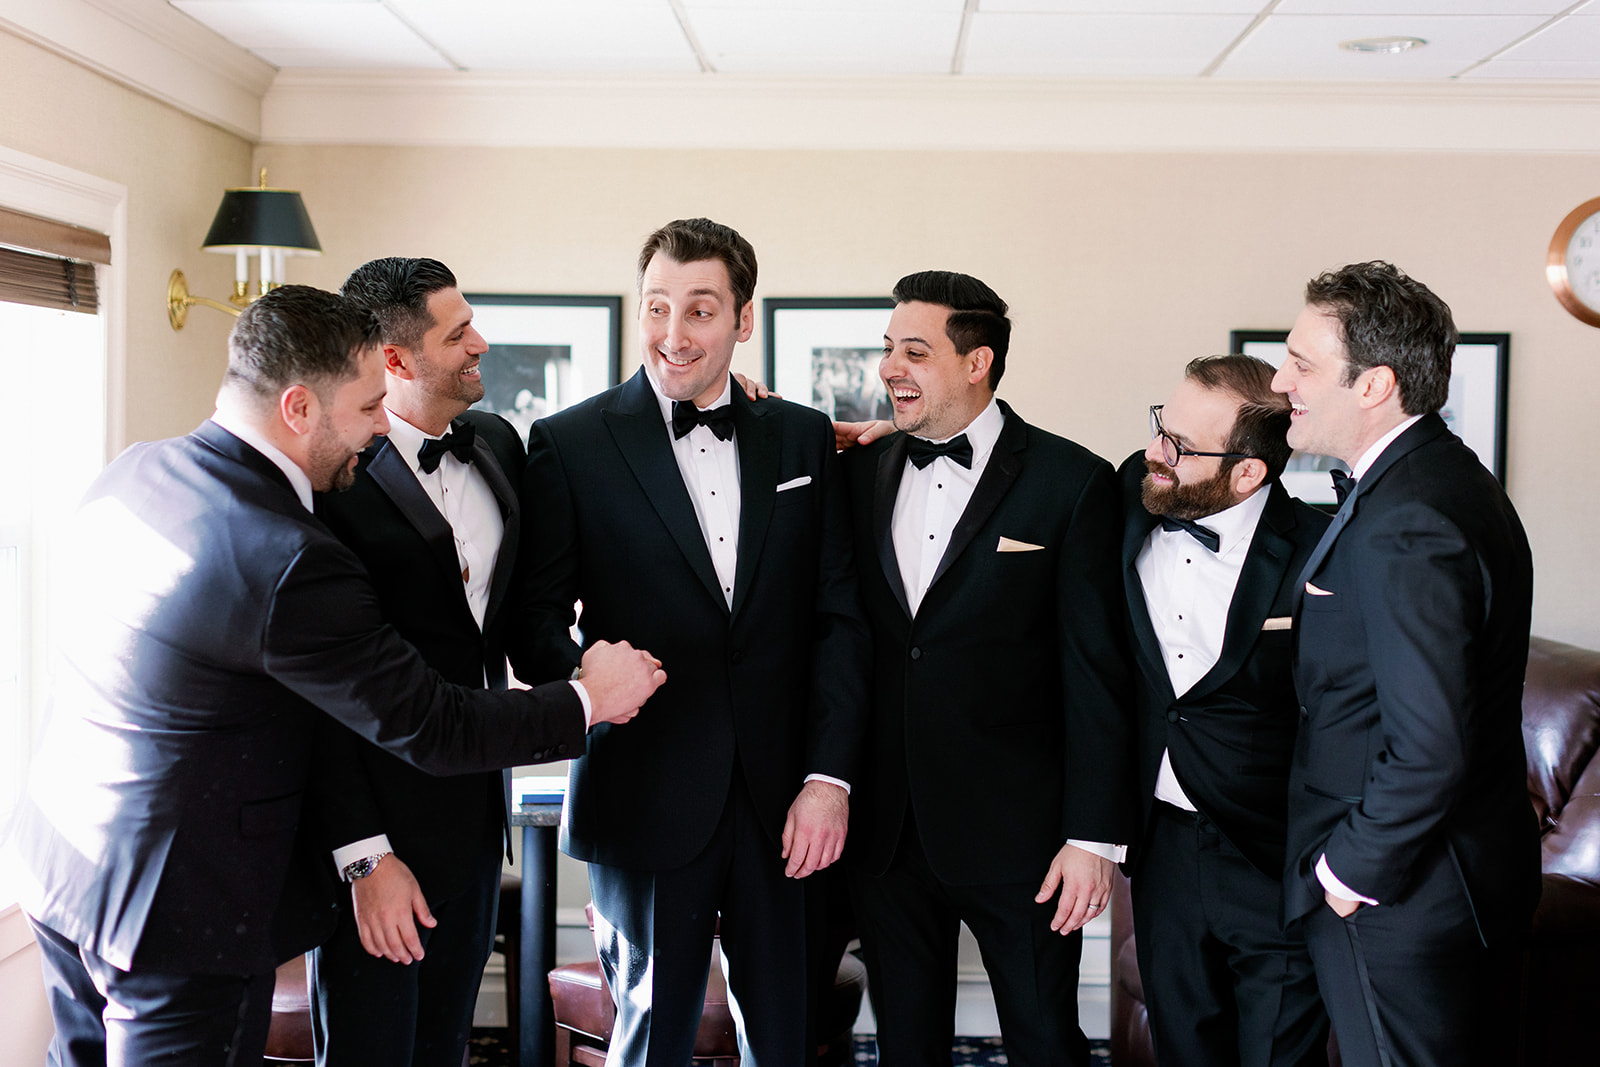 Groom and groomsmen candid group photo at Pine Hollow Country Club.